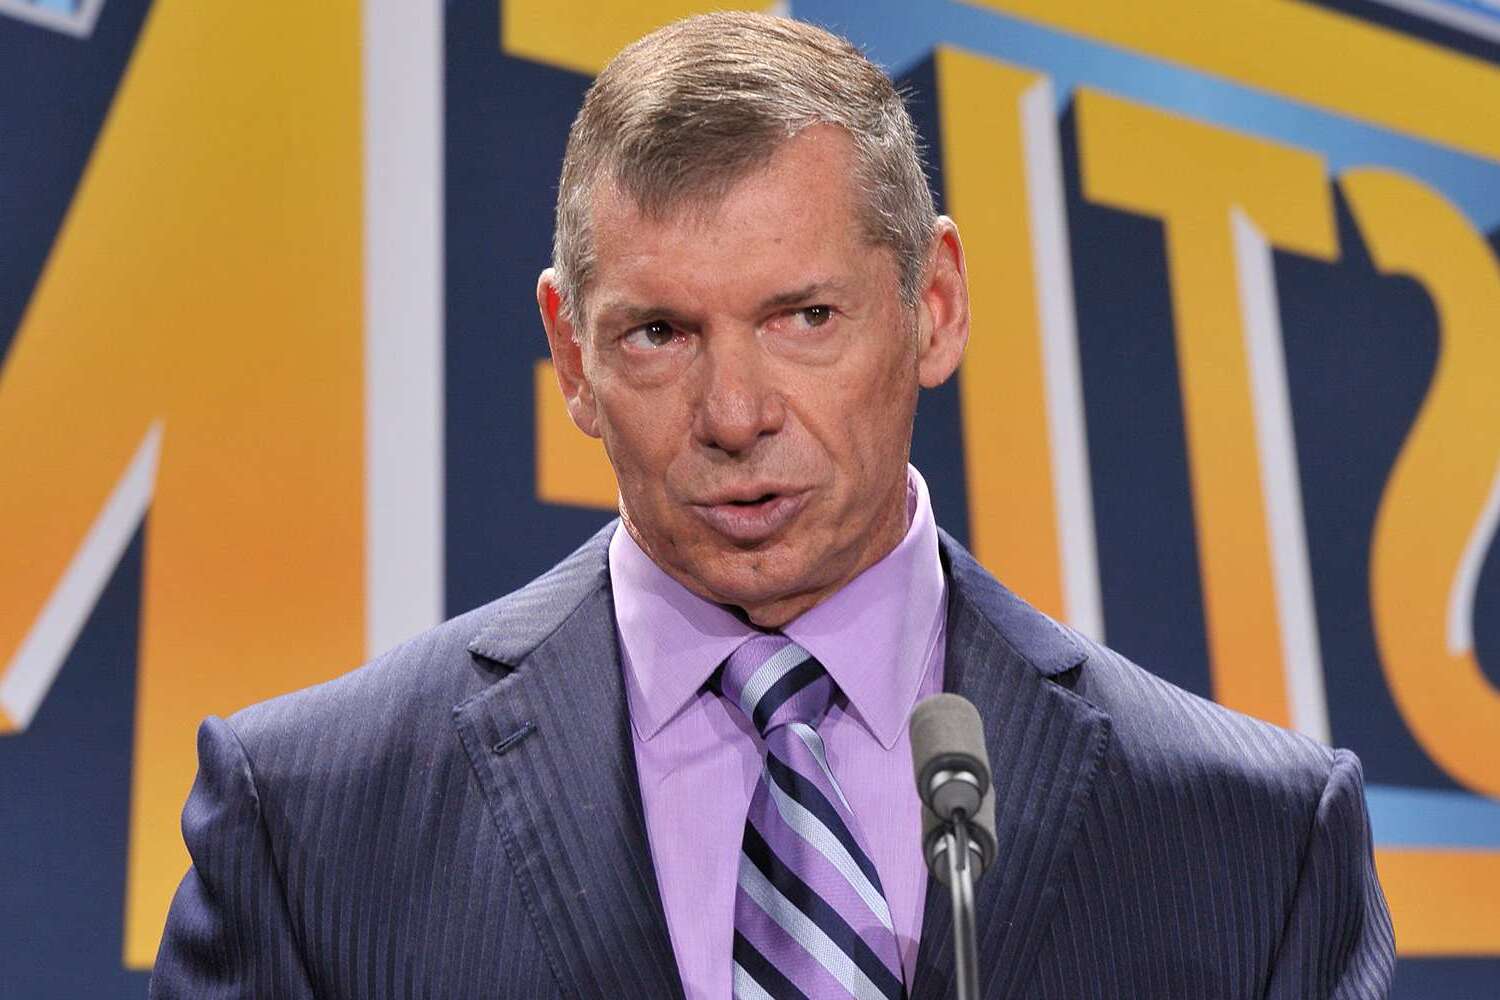 Vince McMahon Sells Over $400 Million Worth Of TKO Stock Amid WWE Scandal